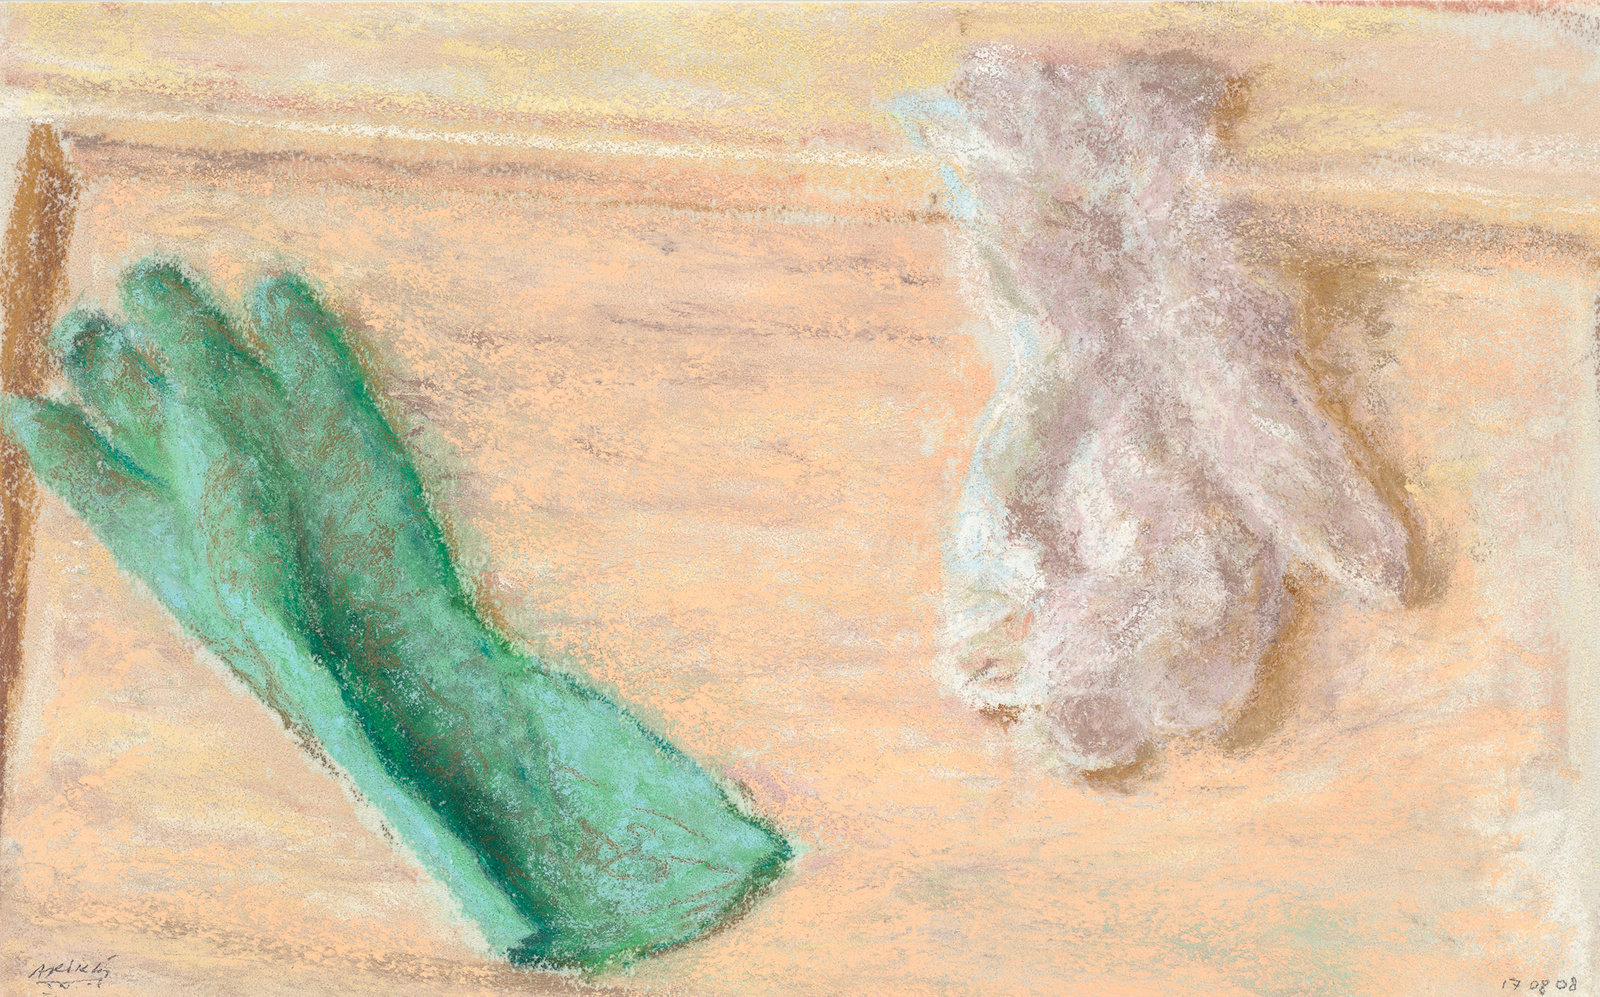 Arikha, green and white gloves, 2008, pastel on paper, 8 5 8 x 13 7 8 in